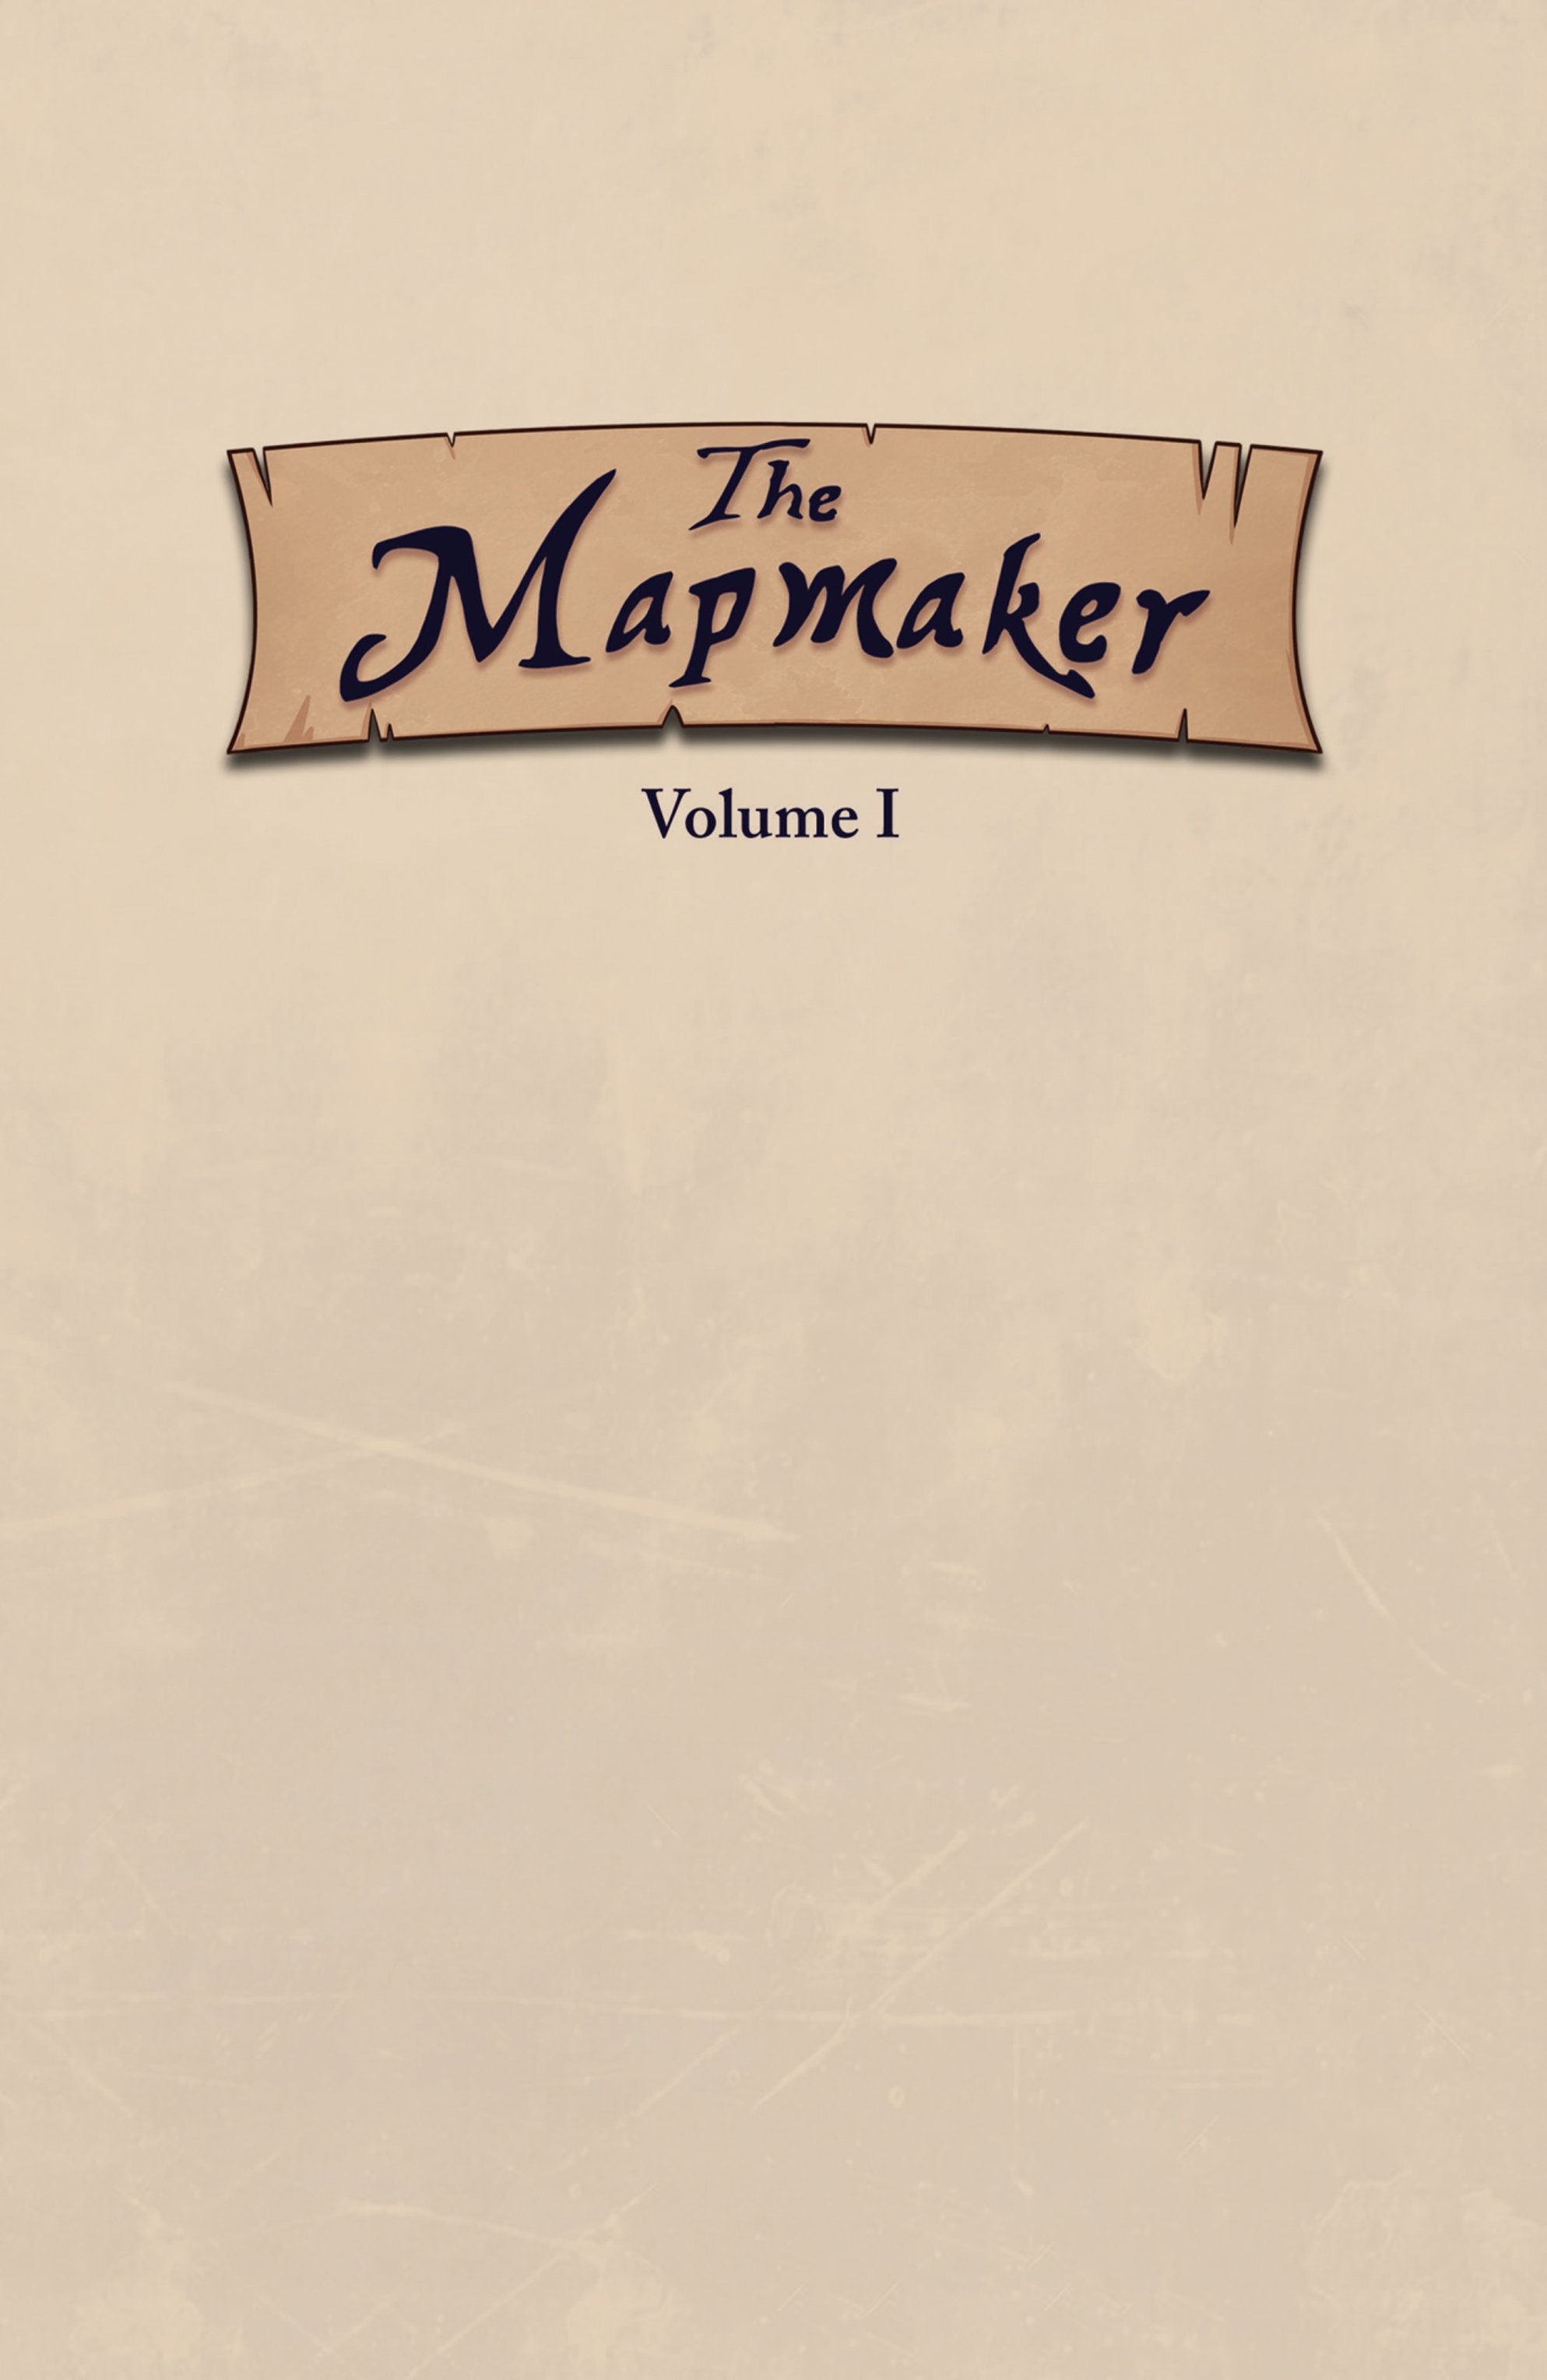 Read online The Mapmaker comic -  Issue # TPB - 2